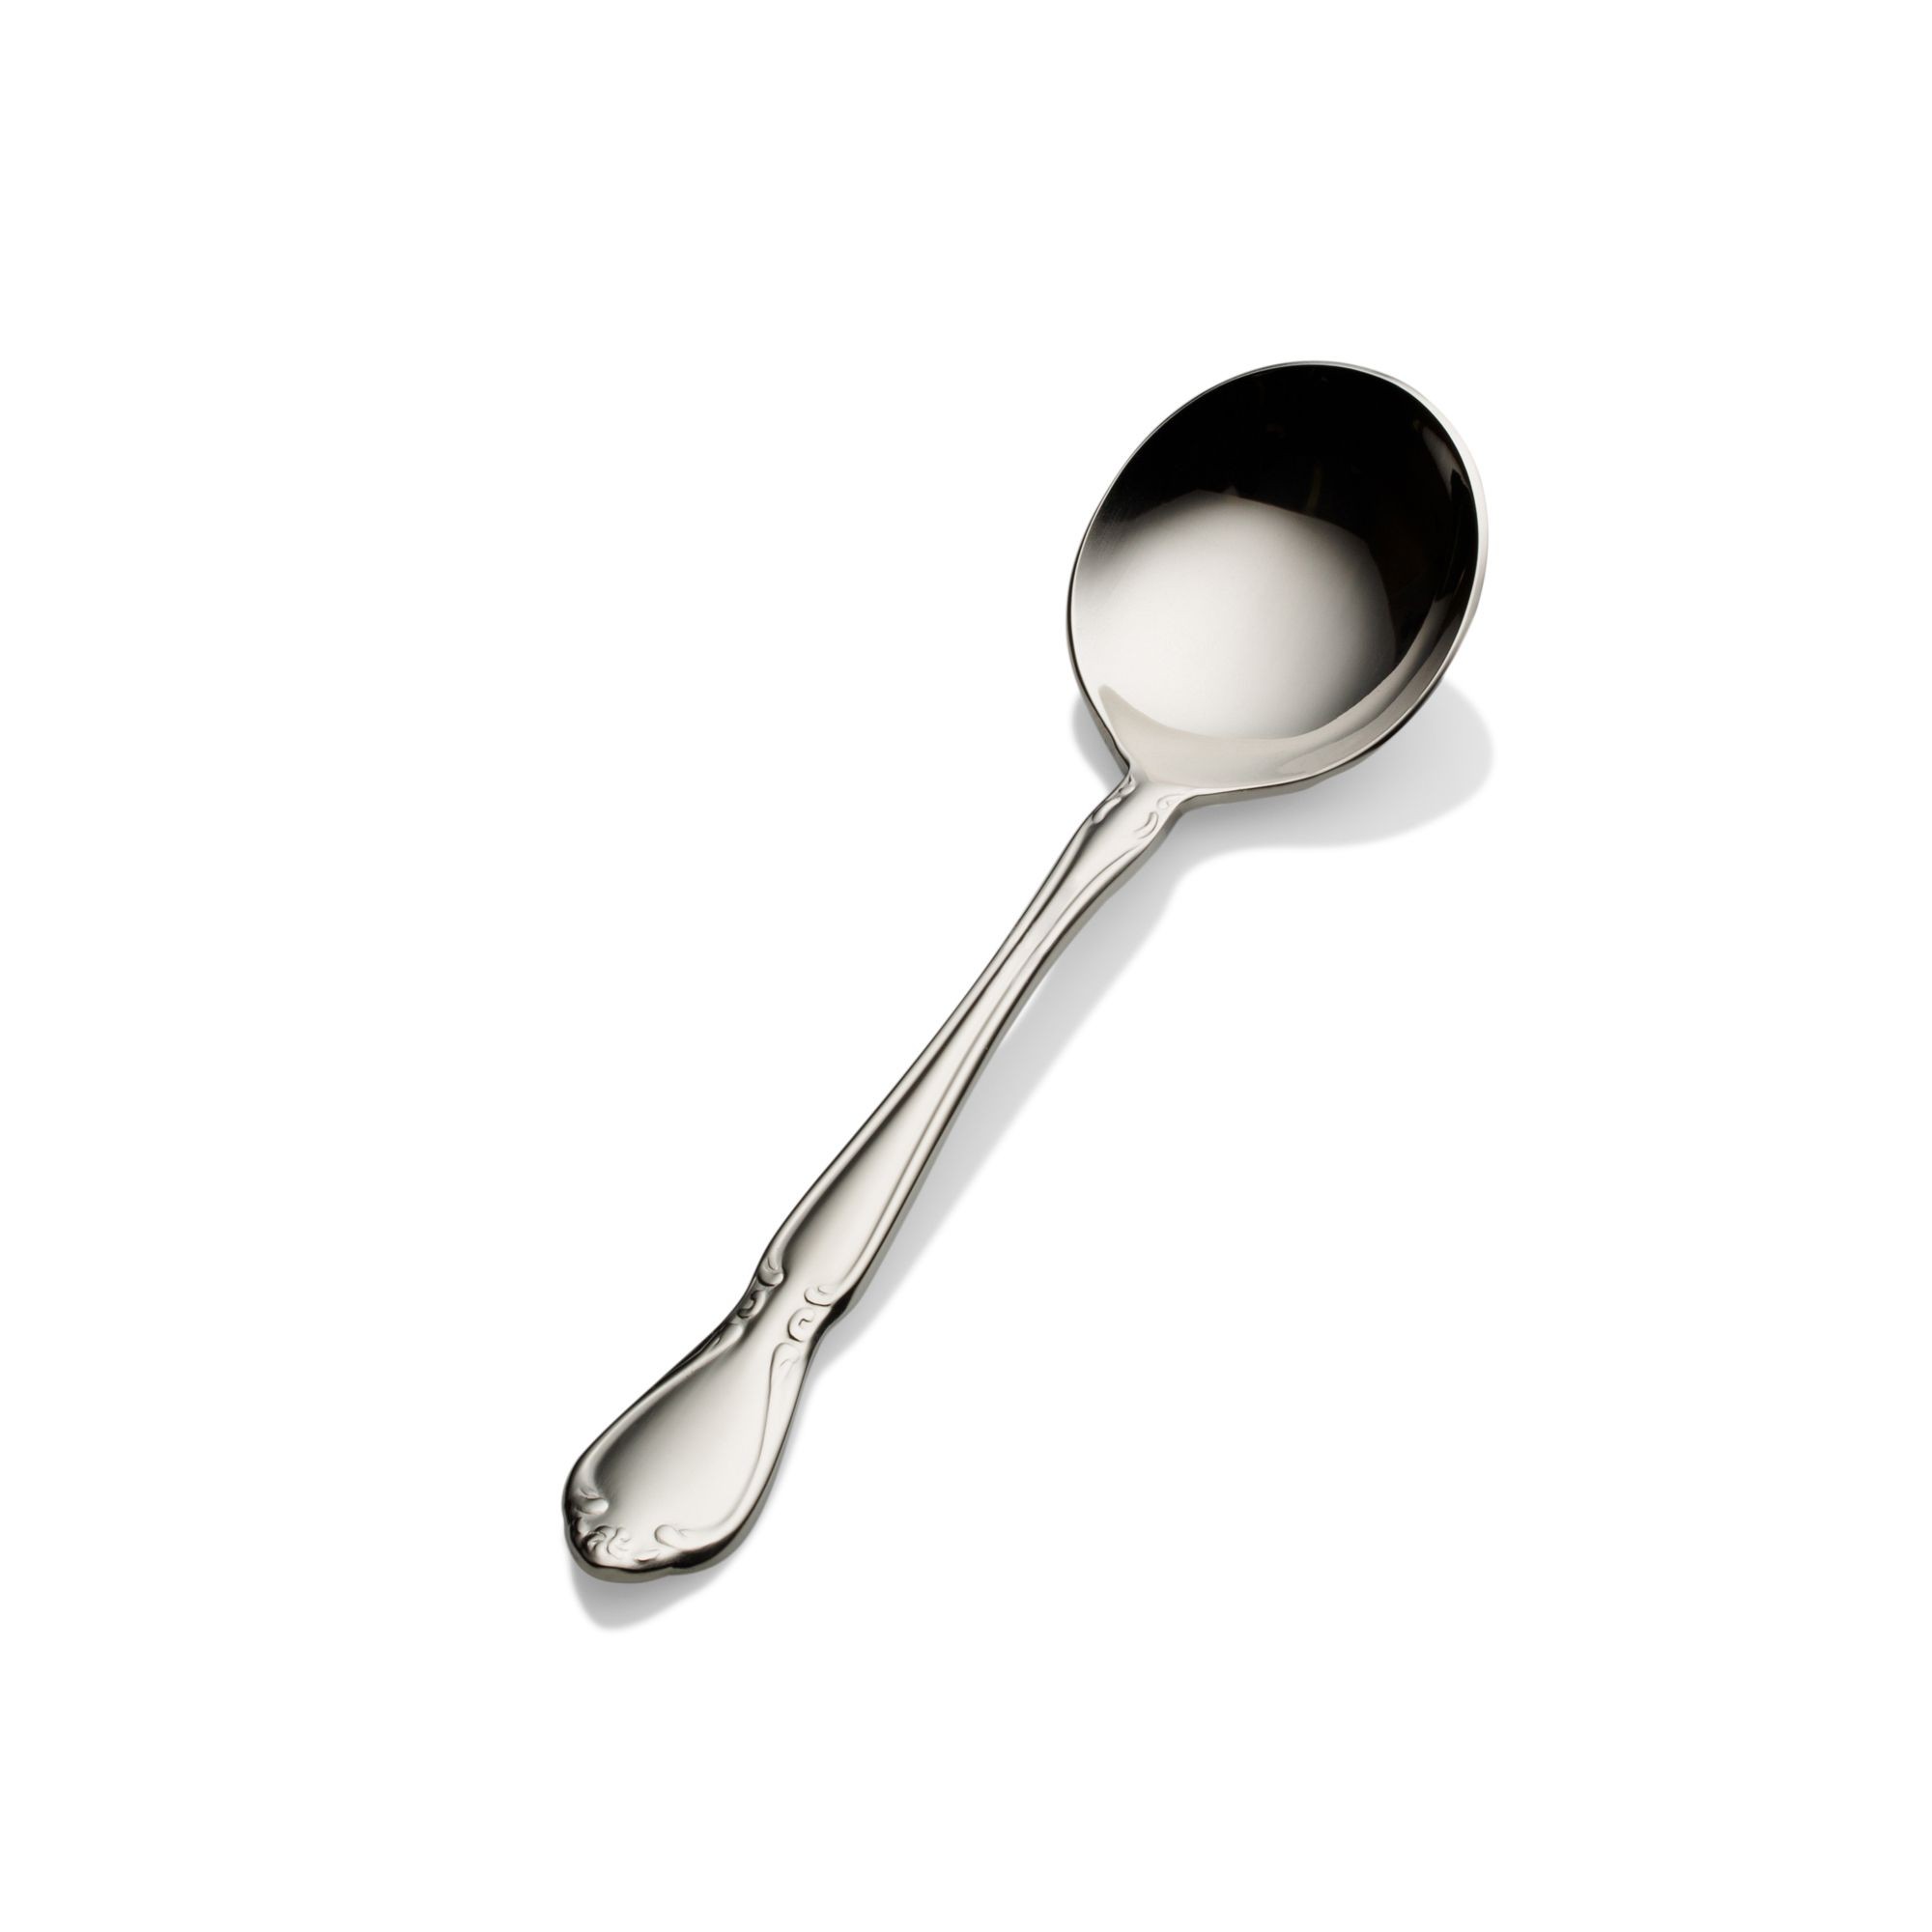 Bon Chef S1801 Queen Anne 18/8 Stainless Steel Bouillon Spoon